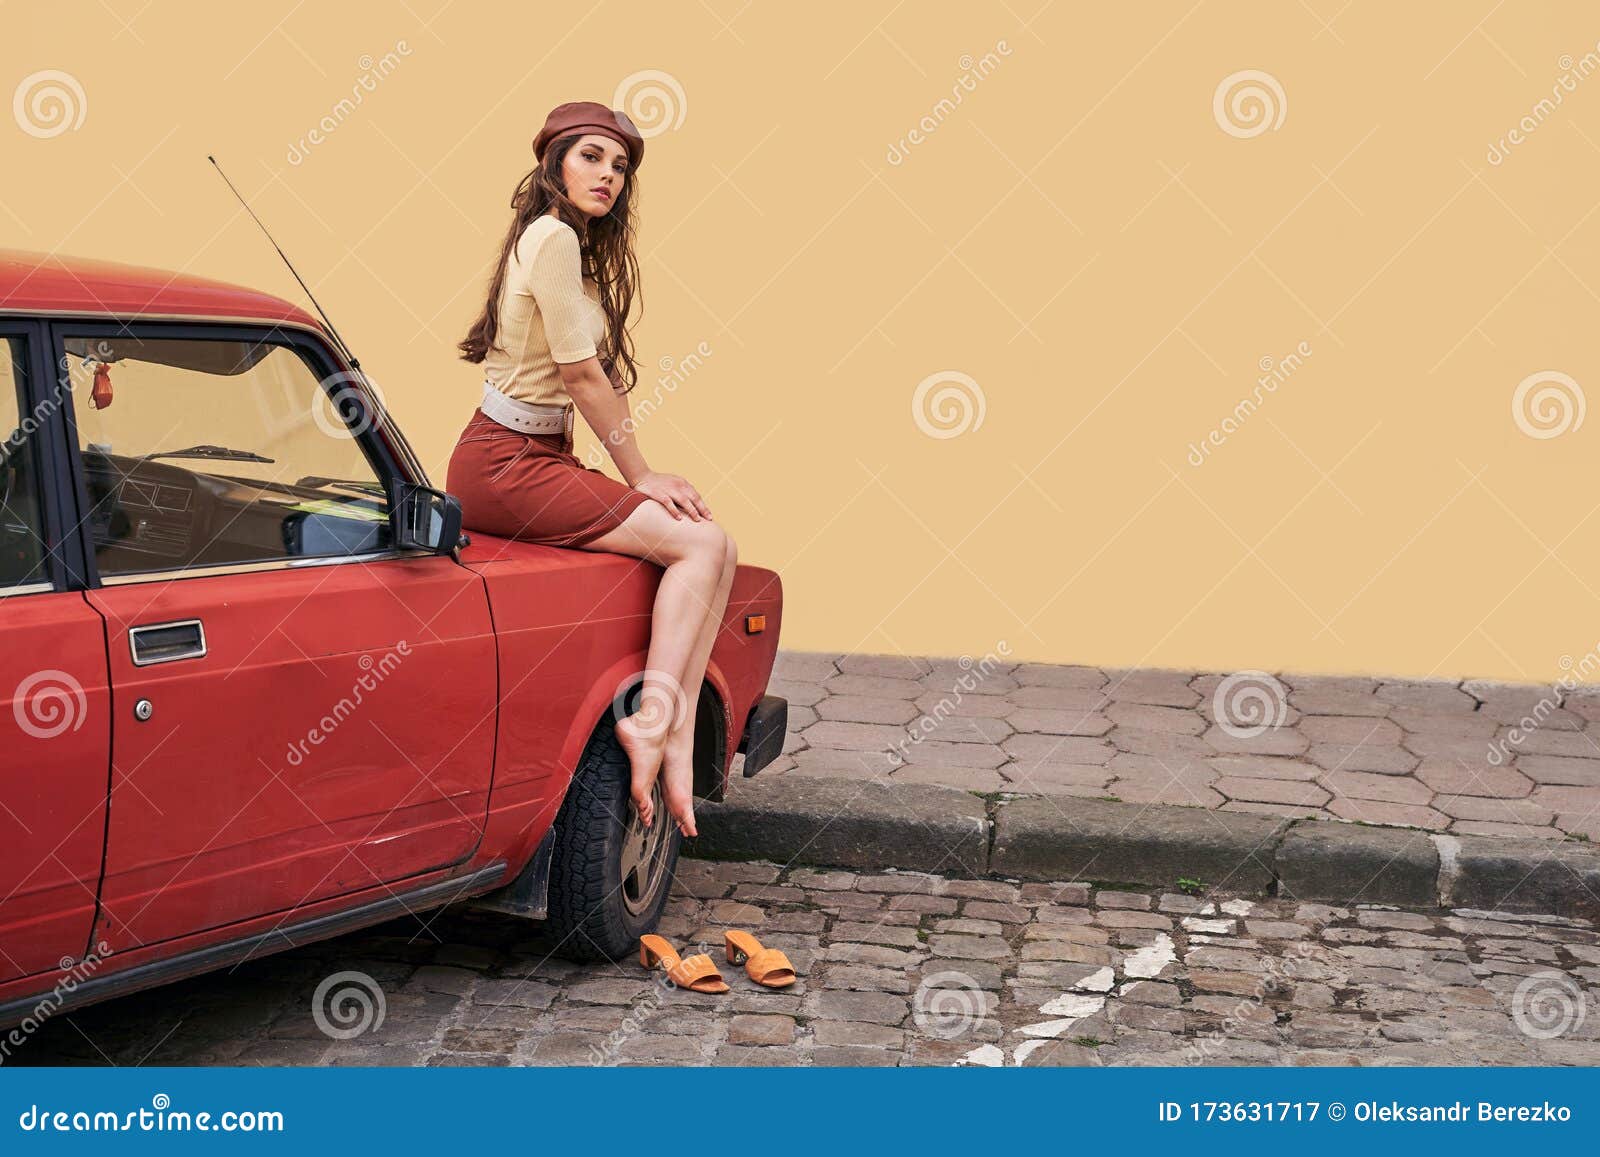 https://thumbs.dreamstime.com/z/young-beautiful-girl-dressed-retro-vintage-style-enjoying-summertime-lifestyle-old-european-city-173631717.jpg